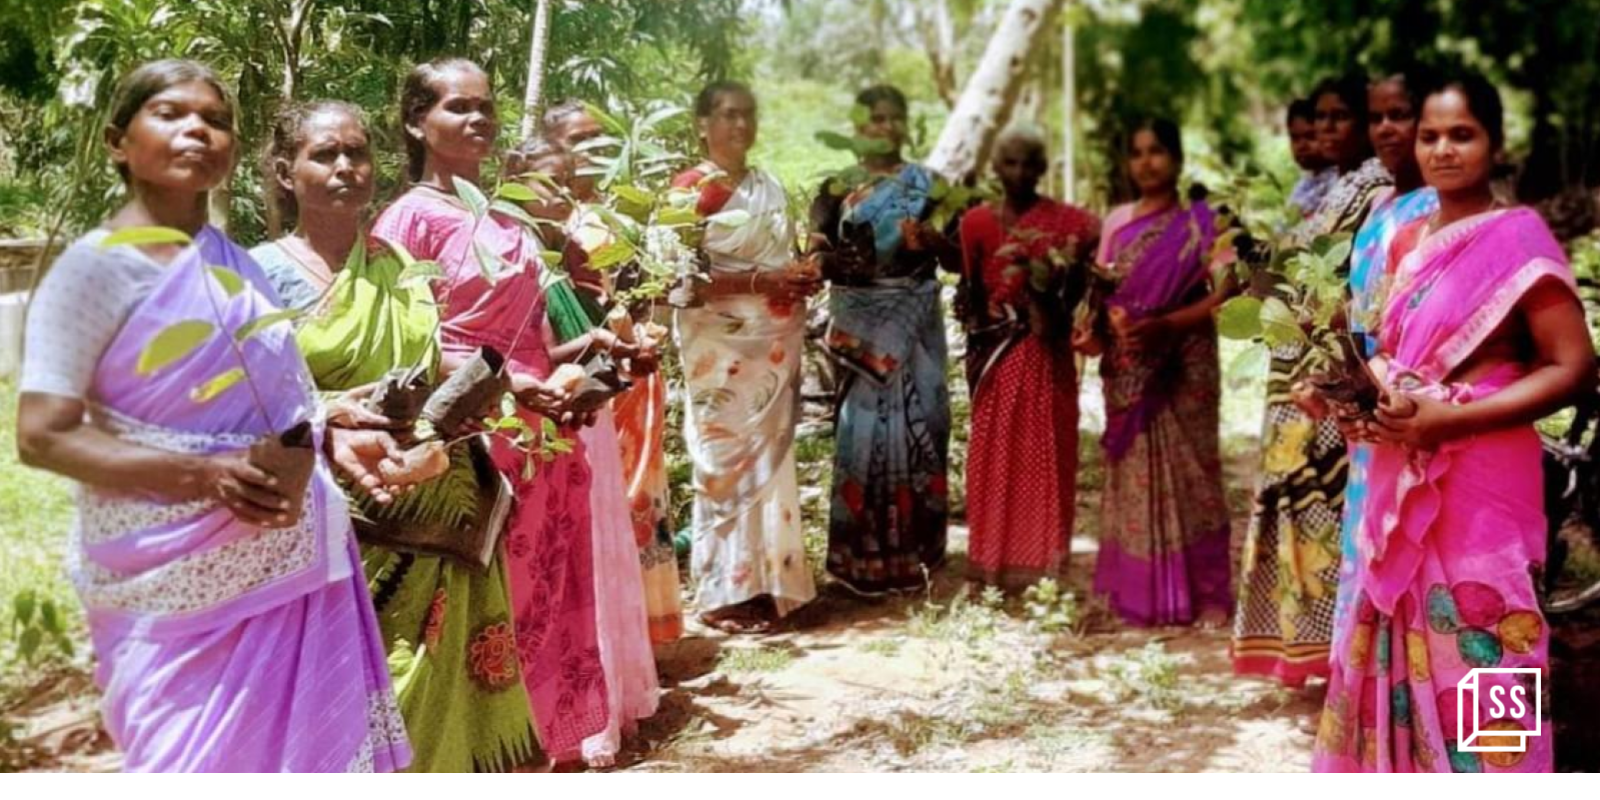 Fighting hunger and landlessness, these Dalit women now reap the fruits of their own labour